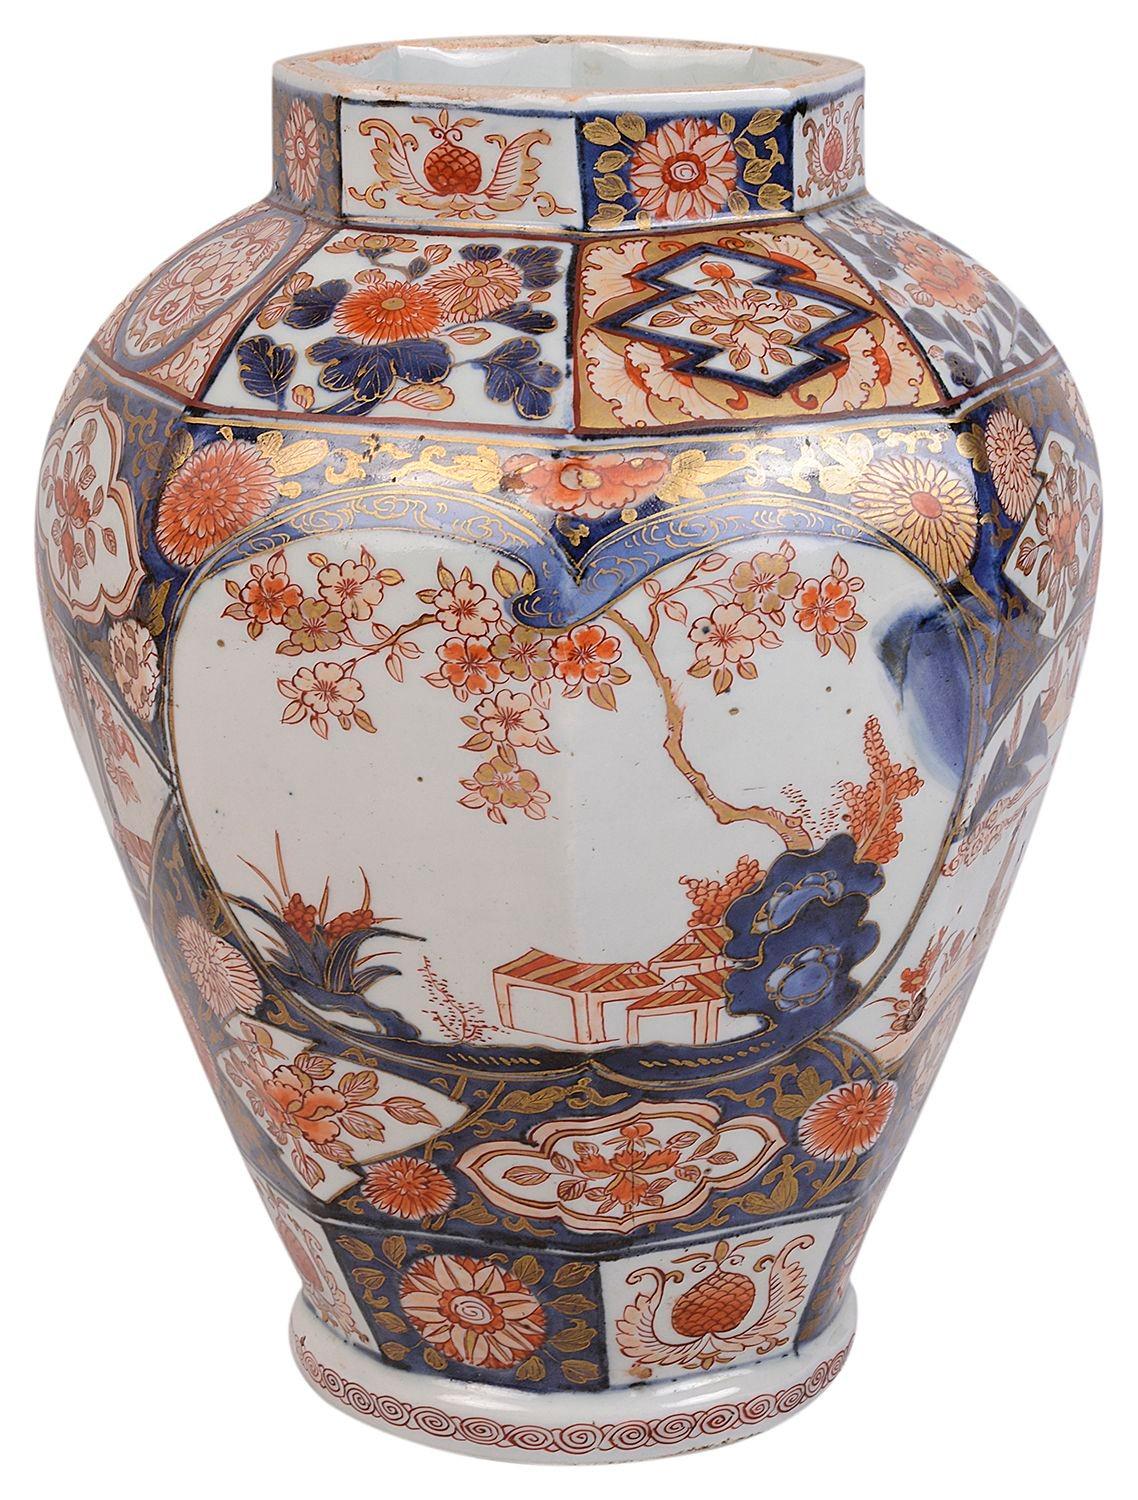 A good quality 18th Century Japanese Arita Imari porcelain vase / lamp. Having wonderful bold colouring to the classical motif decoration to the boarders, inset painted panels depicting blossom trees and people in mountainous setting. 
Conversion to